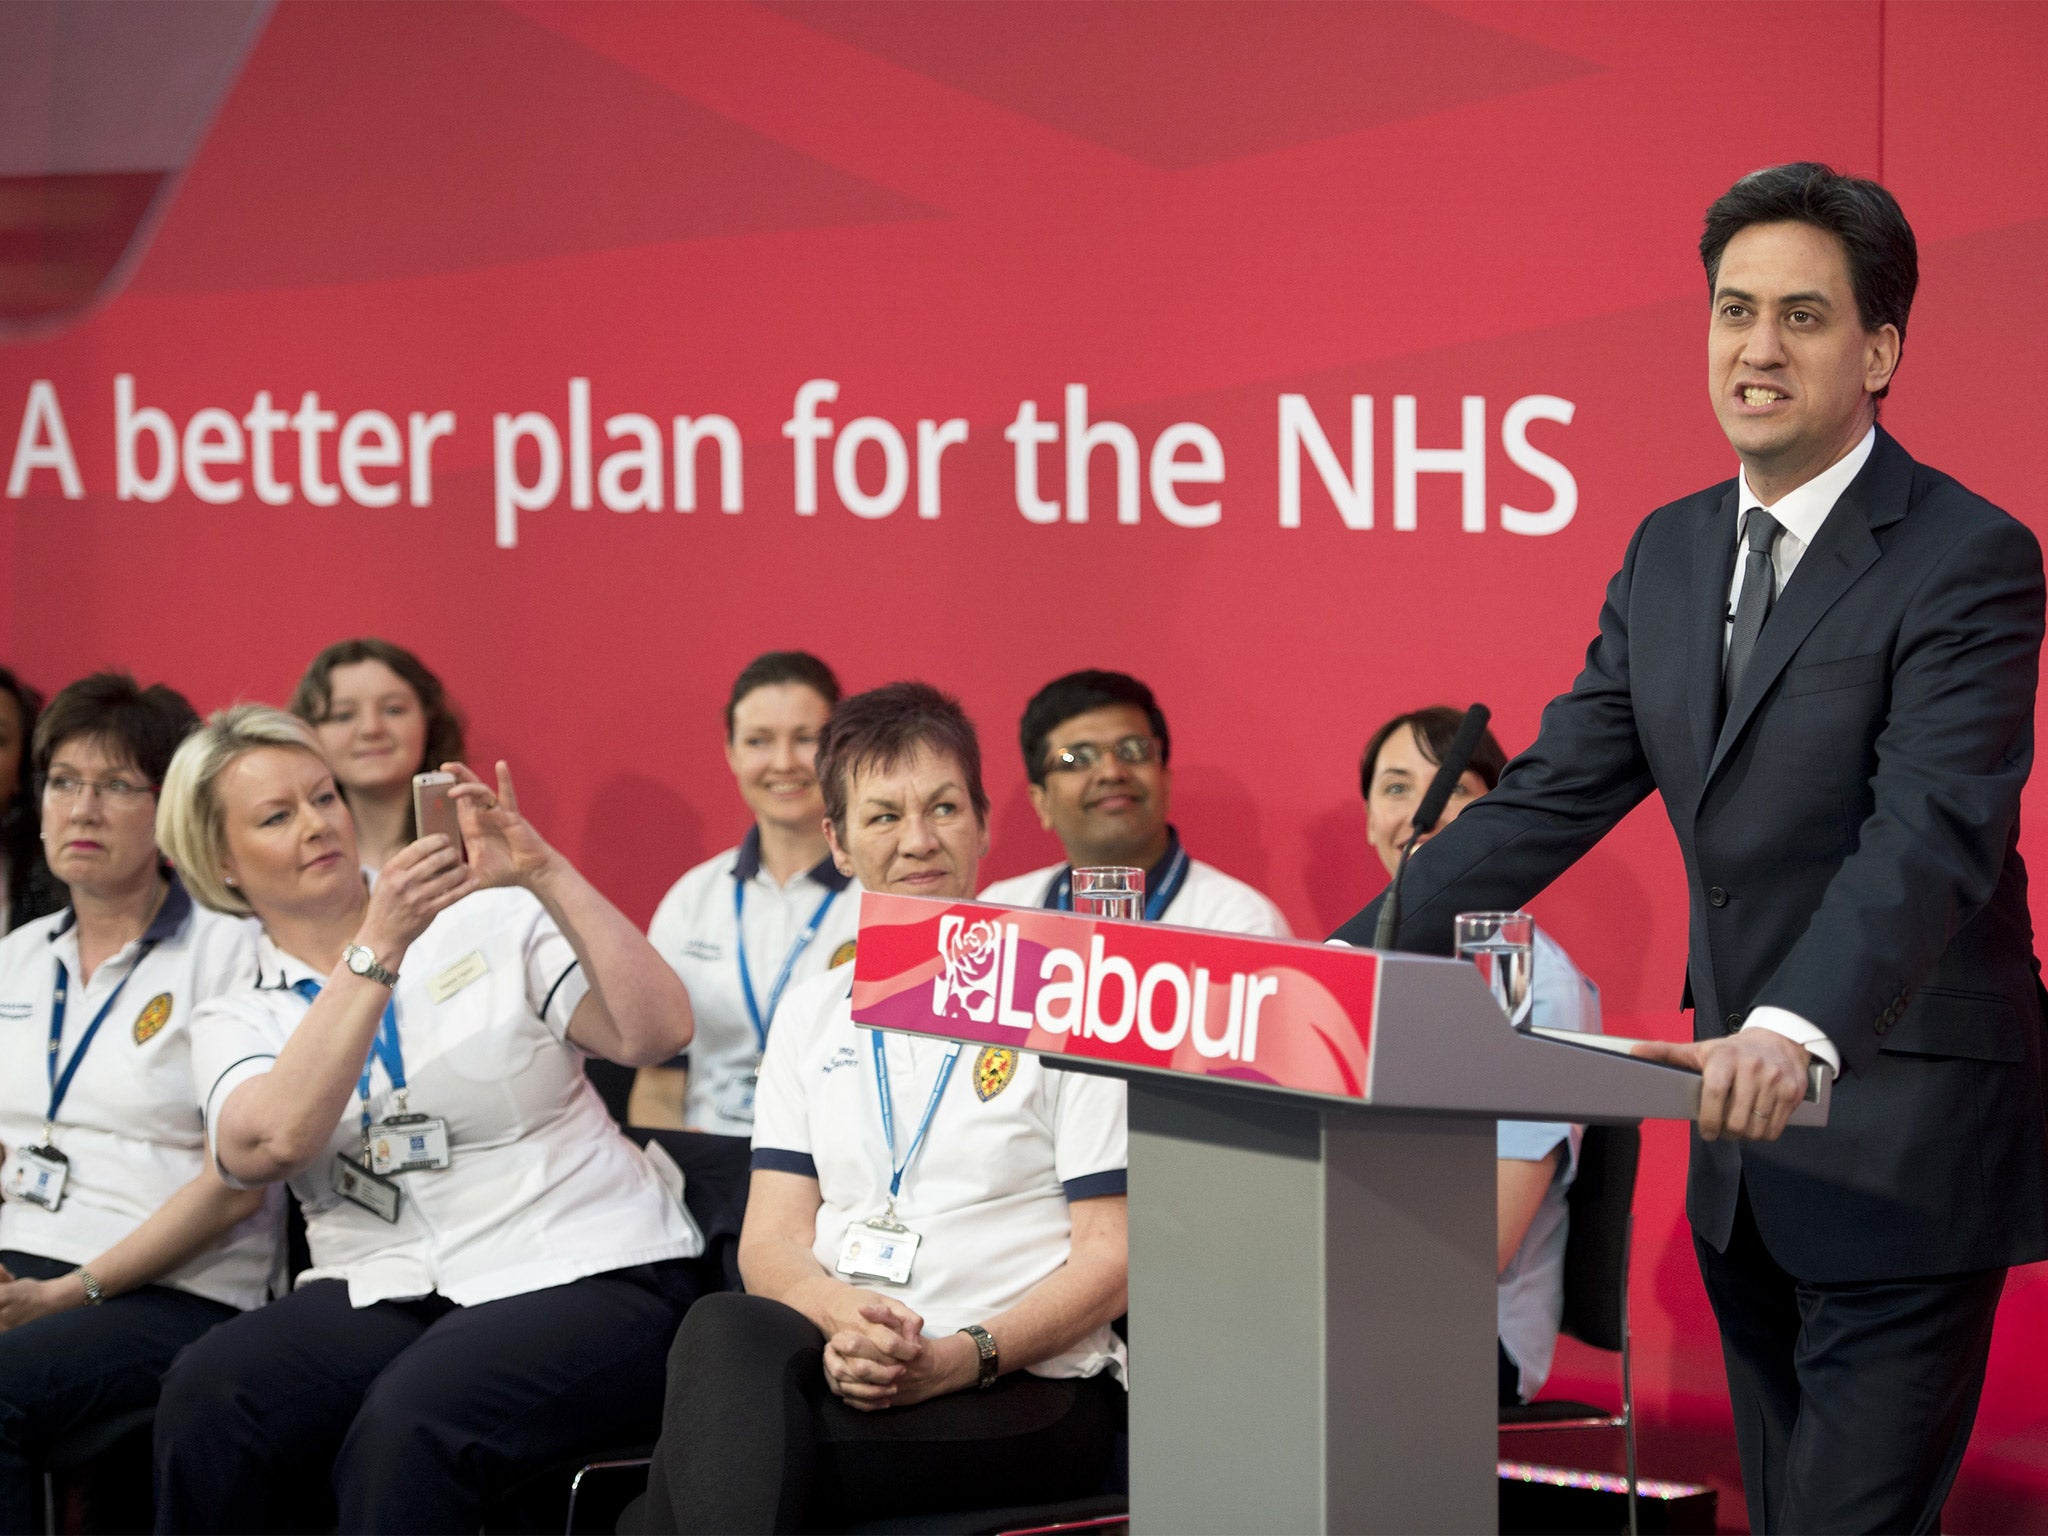 Ed Miliband addresses an audience in the Brooks Building of Manchester Metropolitan University on the subject of healthcare